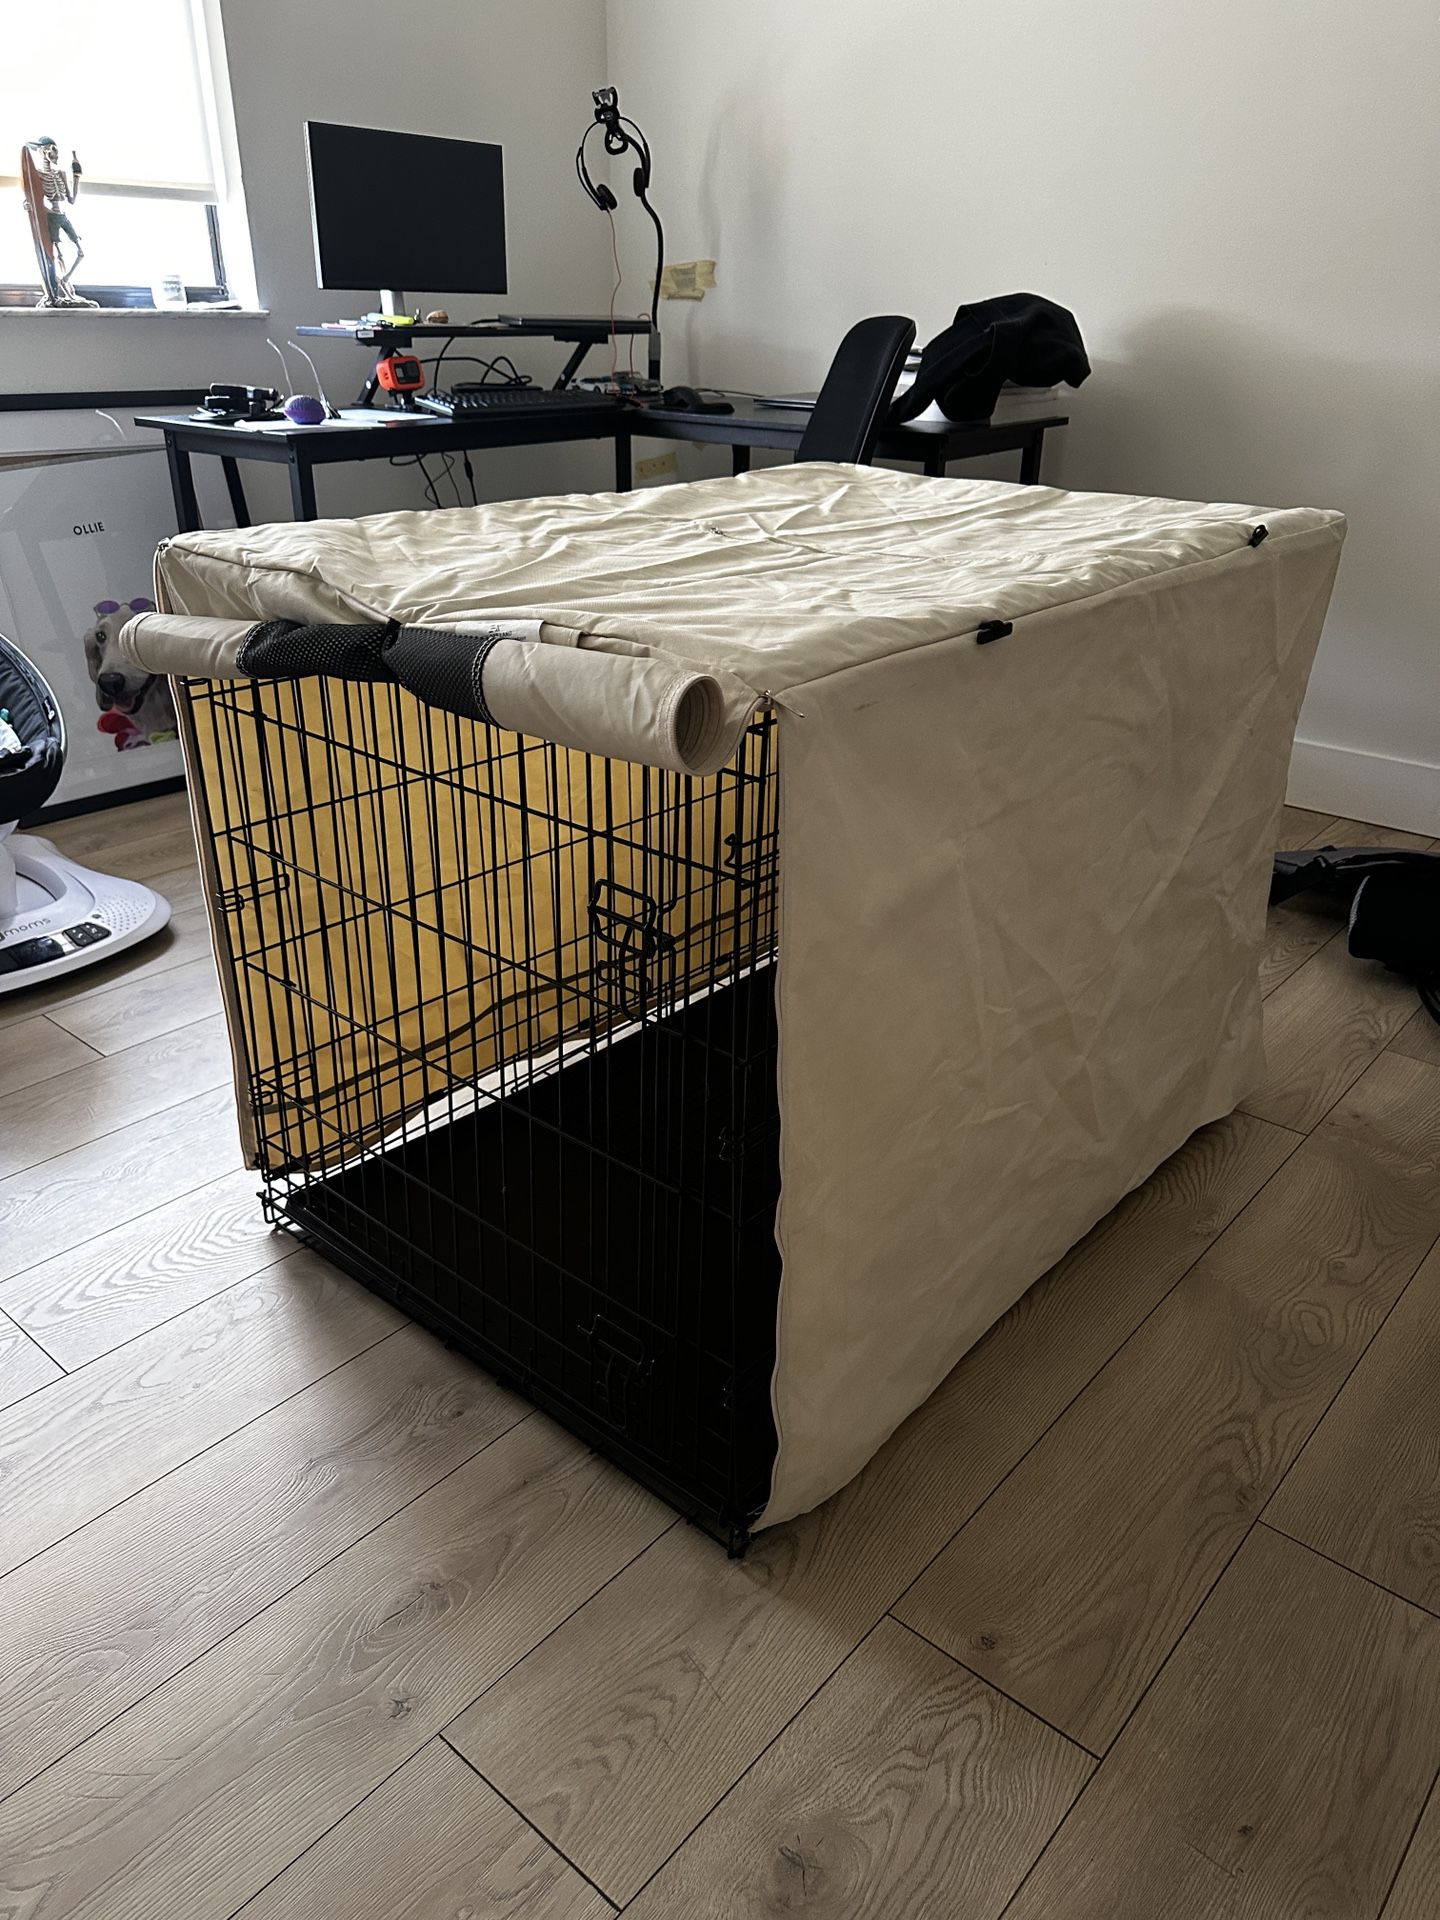 XL Dog Crate With Canvas Cover